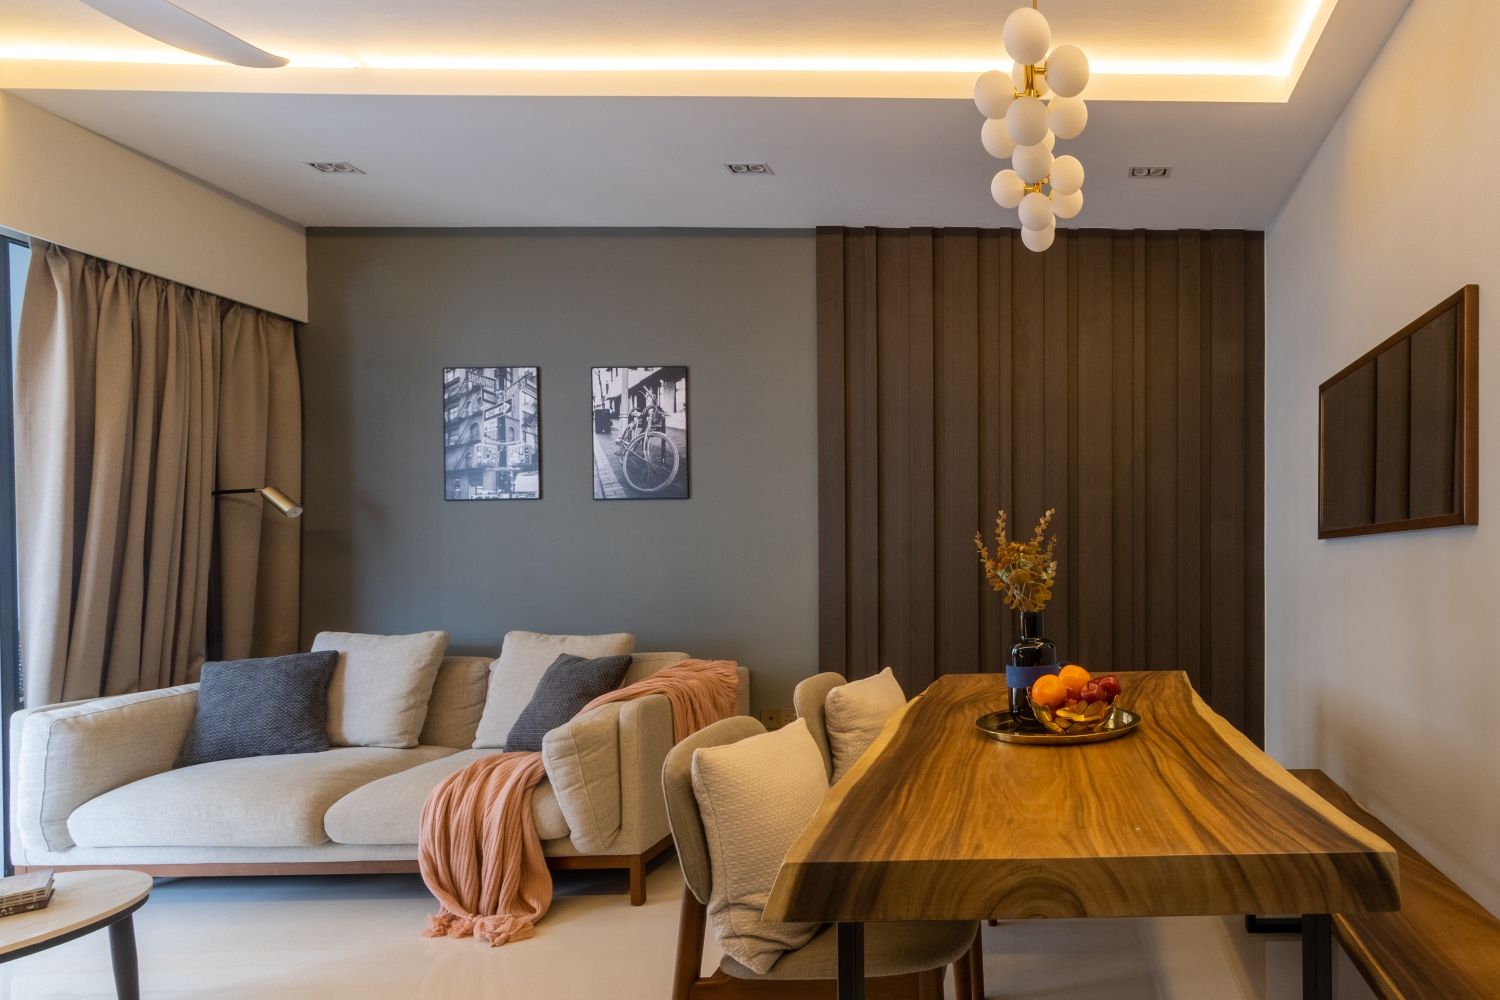 Contemporary Wall Design With Grey Wall Paint And Brown Fluted Panels